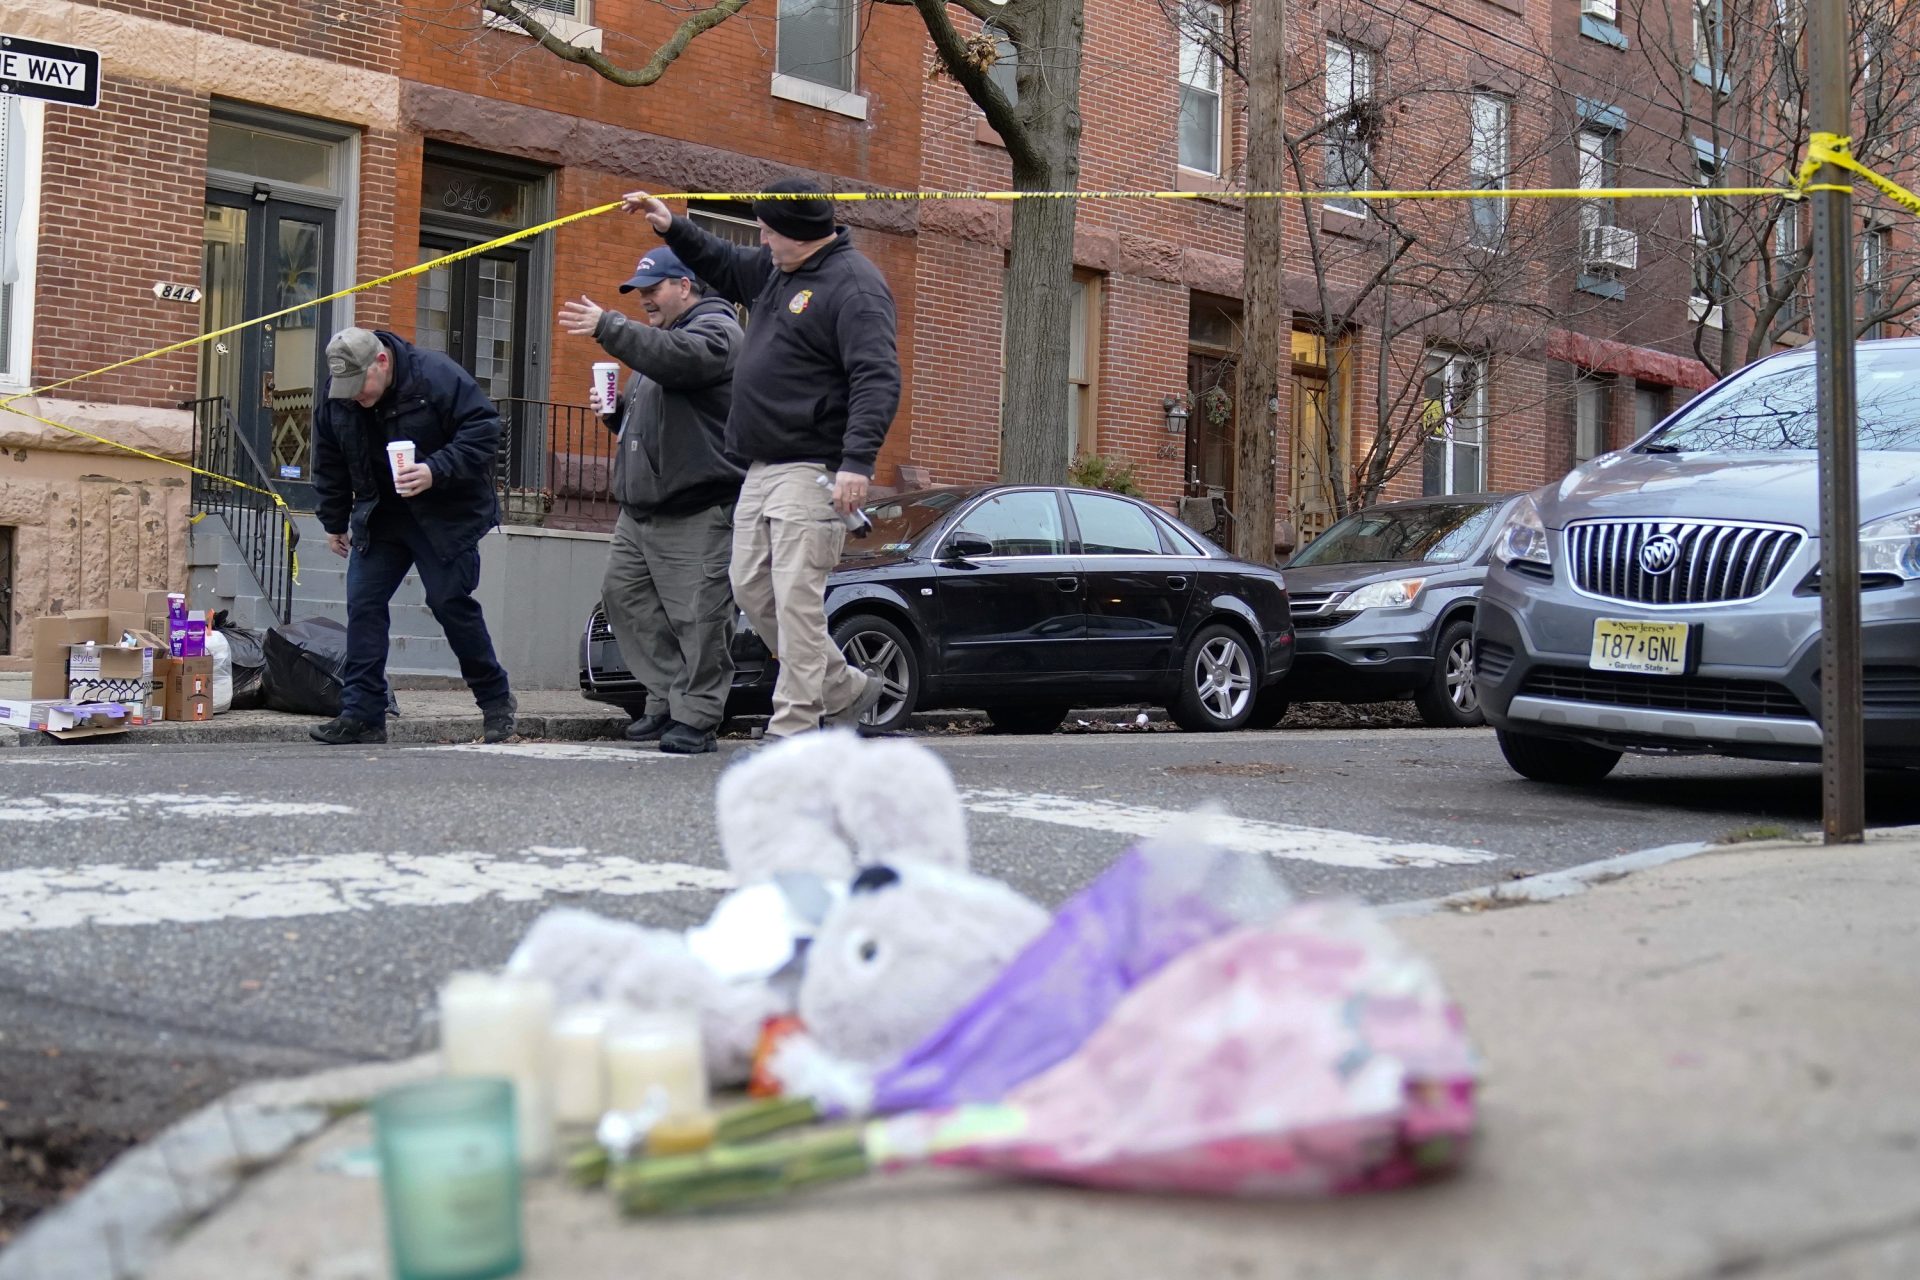 Officials pass flowers and other items left in memory of victims of Wednesday's fatal fire in the Fairmount neighborhood of Philadelphia on Thursday, Jan. 6, 2022. Officials say it's the city's deadliest single fire in at least a century.